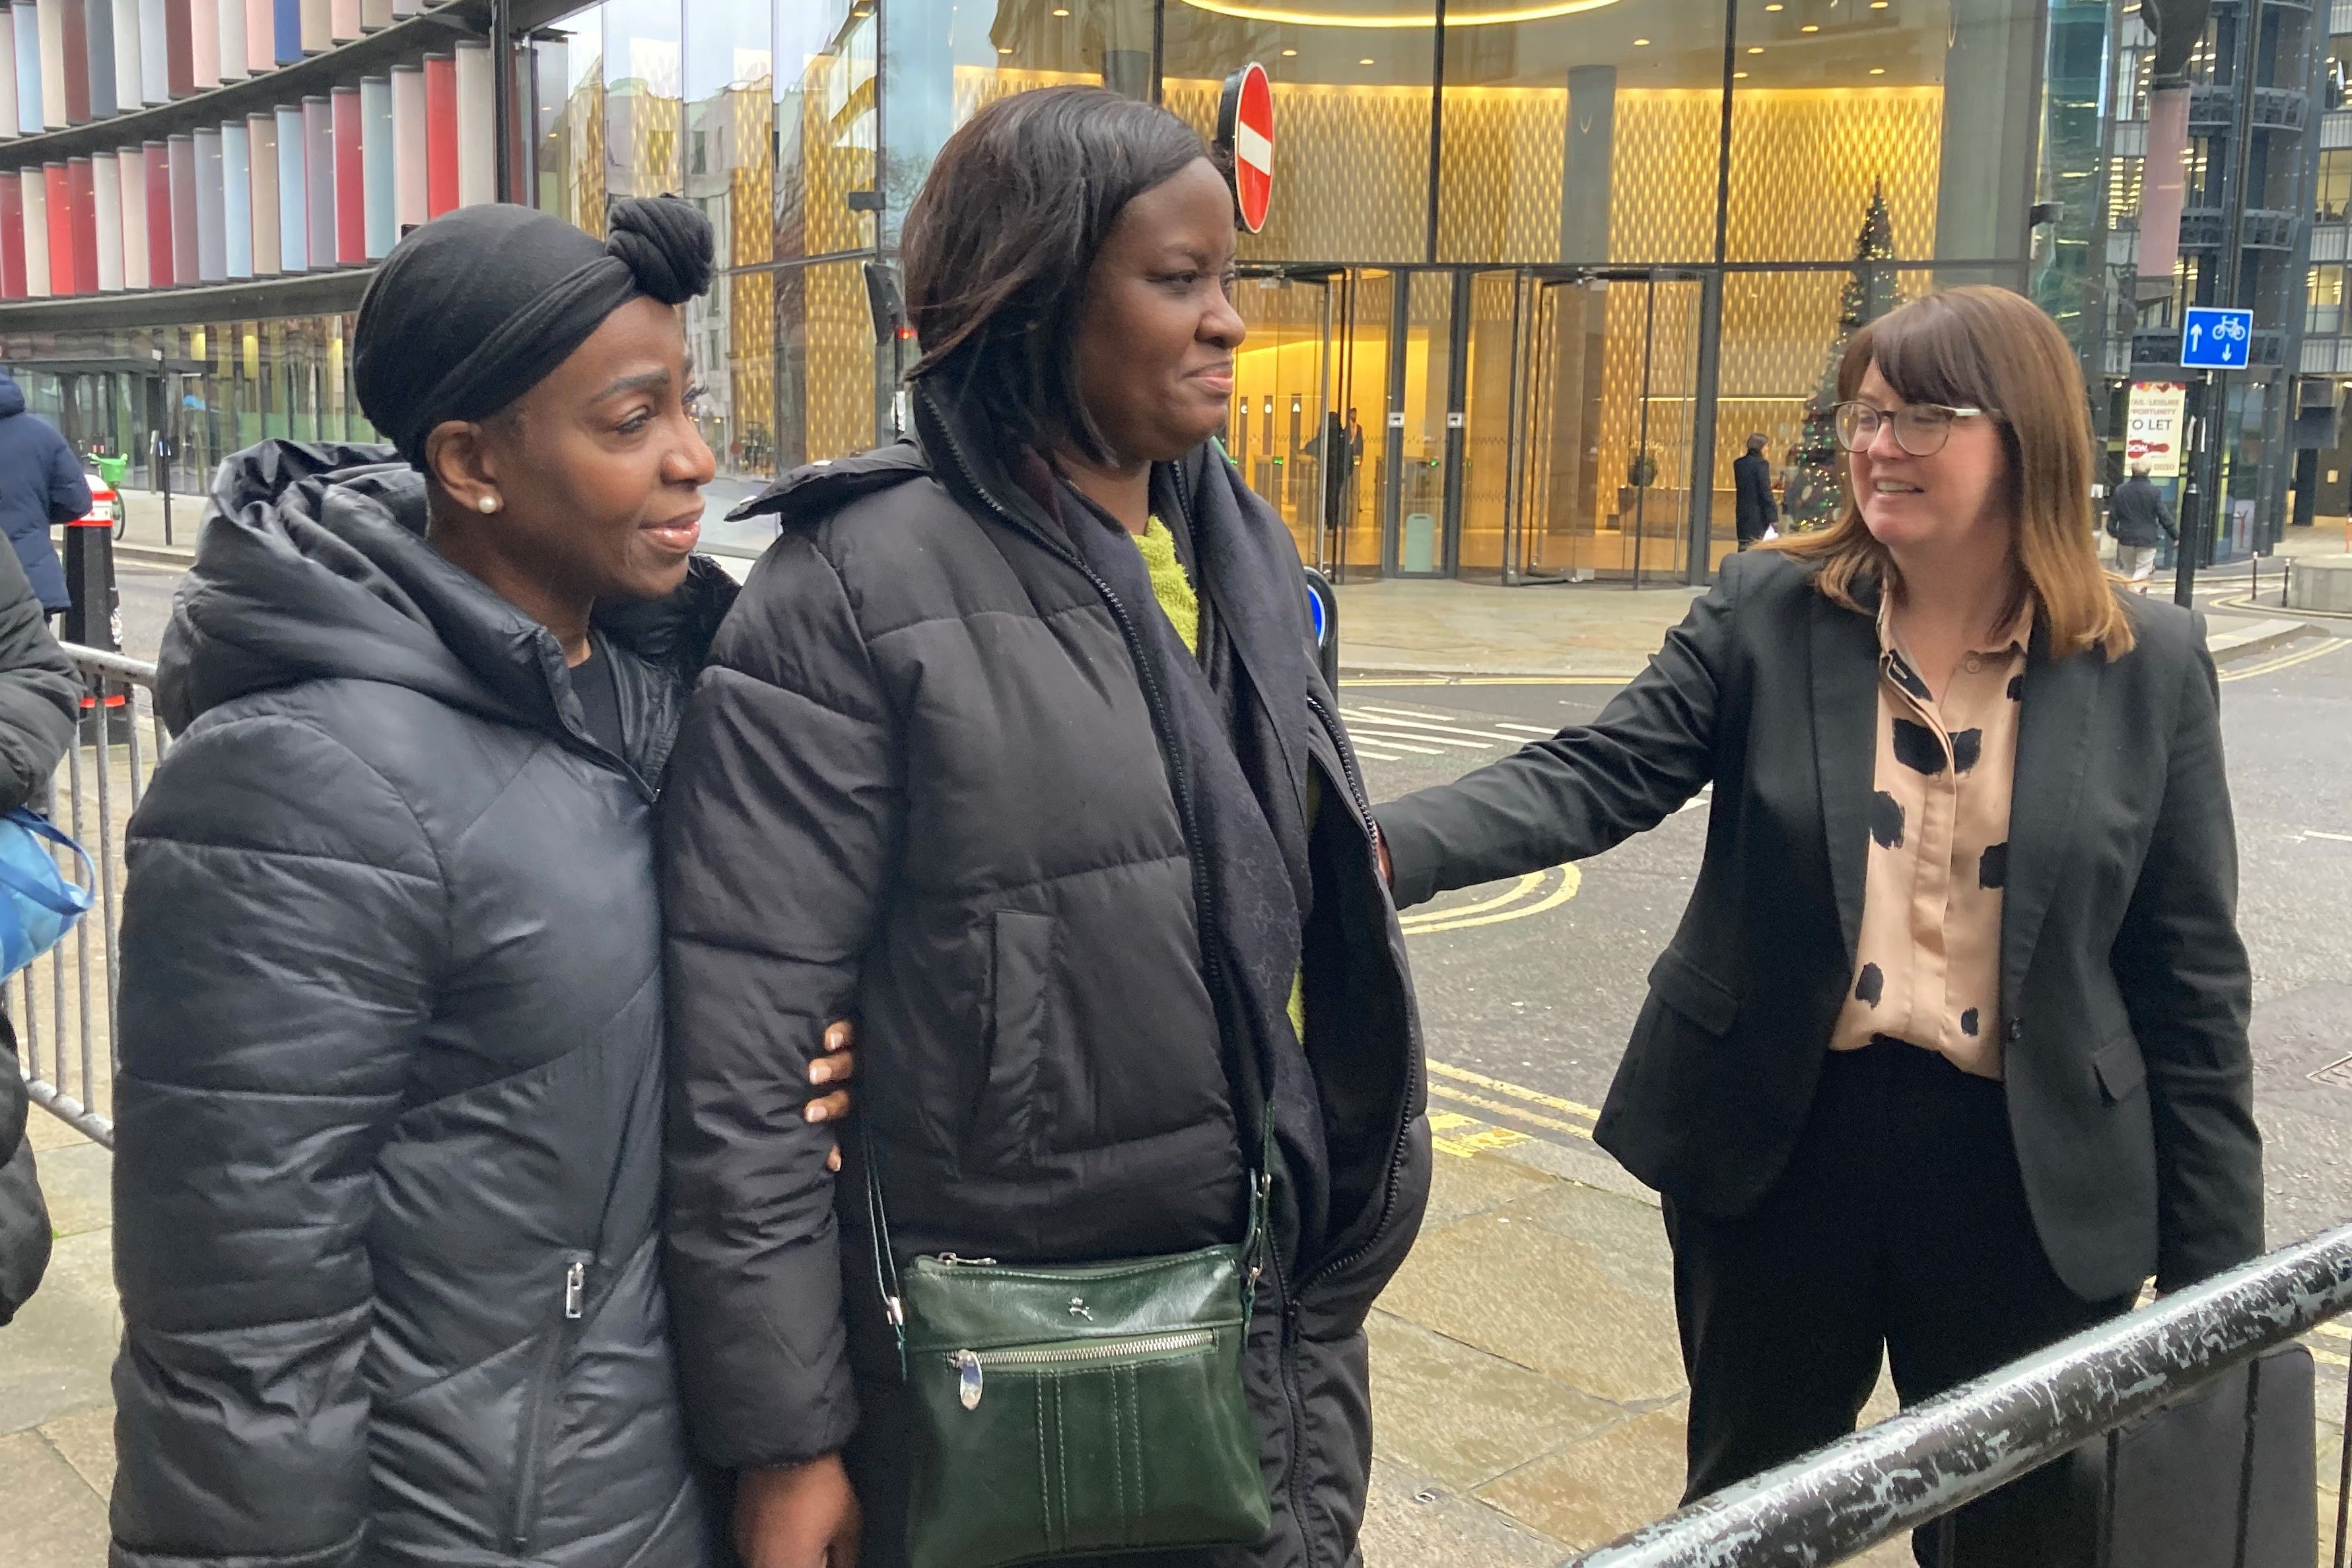 Tracey-Ann Henry, the aunt of Samantha Drummonds, sister of Tanysha Ofori-Akuffo, 45, and daughter of Dolet Hill, speaks to the media outside the Old Bailey, central London, where Joshua Jacques, 29, was found guilty of murder